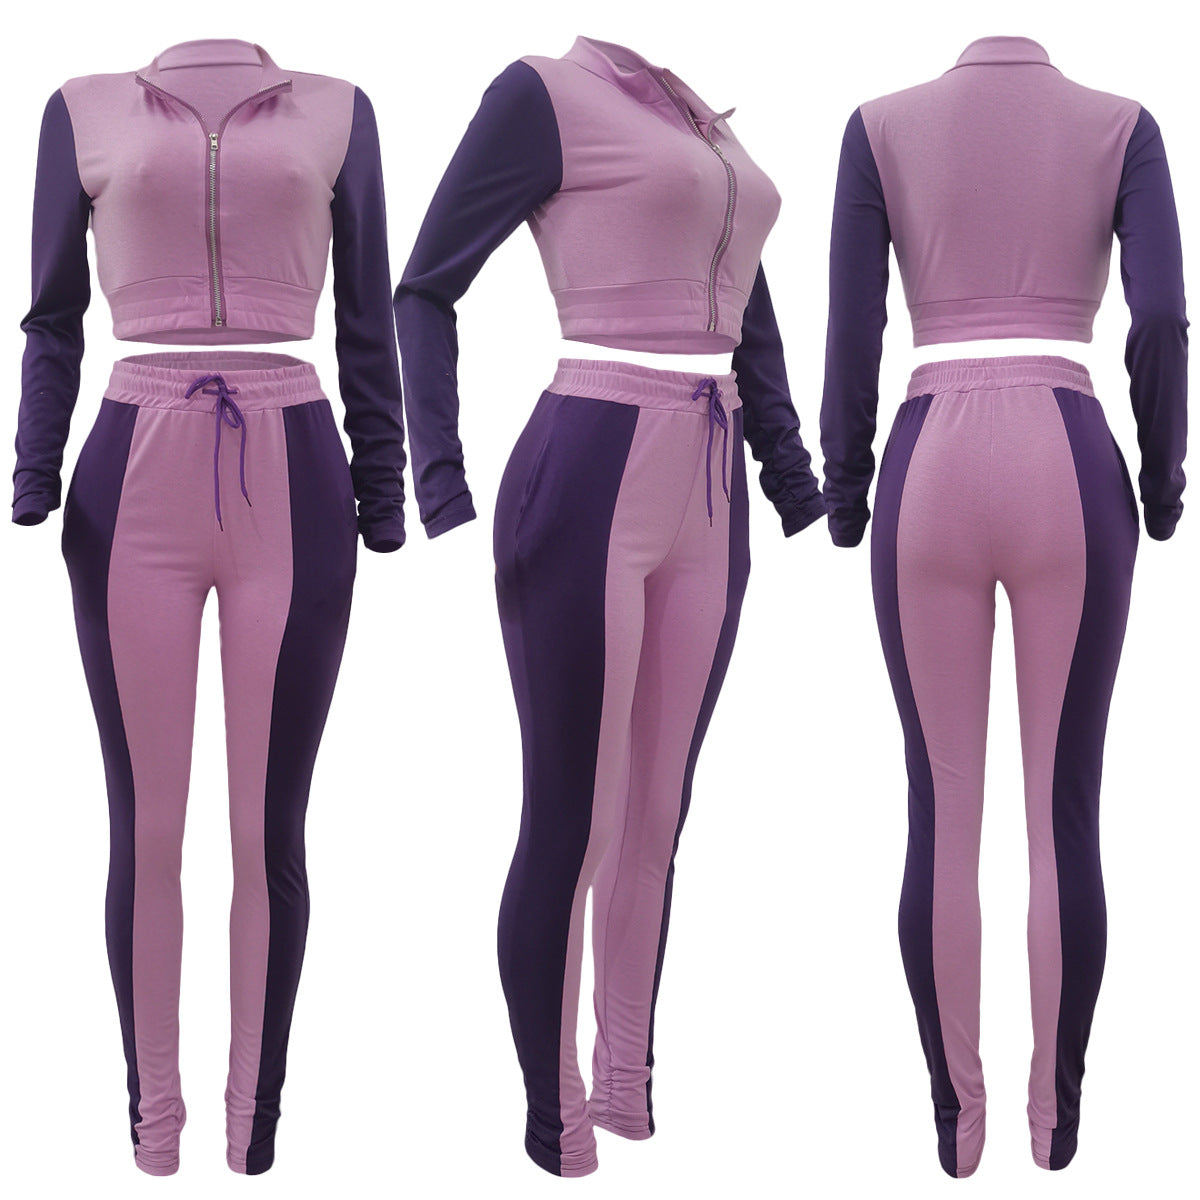 BamBam Women Autumn and Winter Casual Color Block Long Sleeve Top and Pant Two-piece Set - BamBam